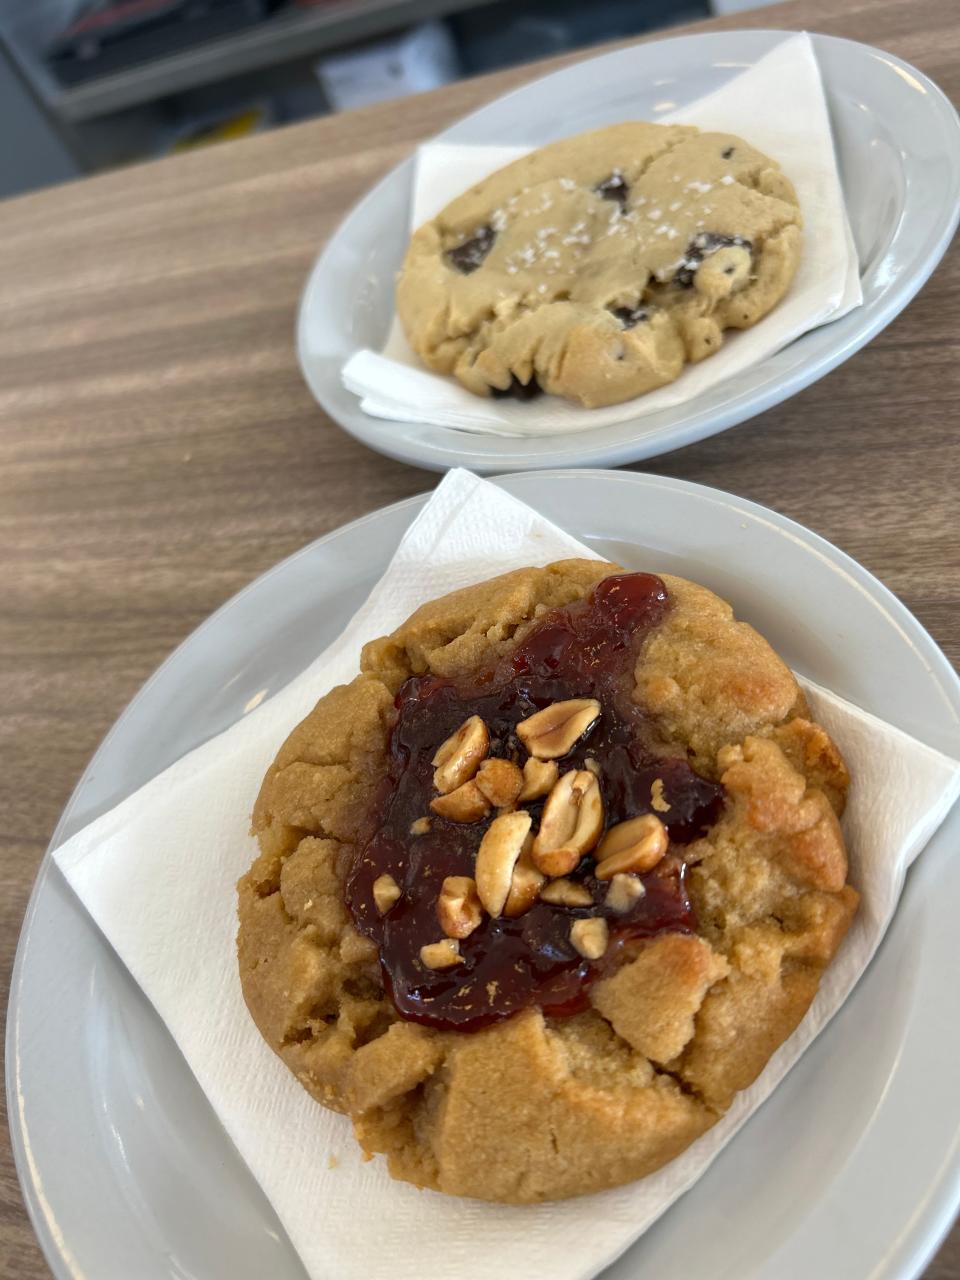 A peanut butter and jelly cookie and dark chocolate chunk cookie at TUSK diner in Barberton.